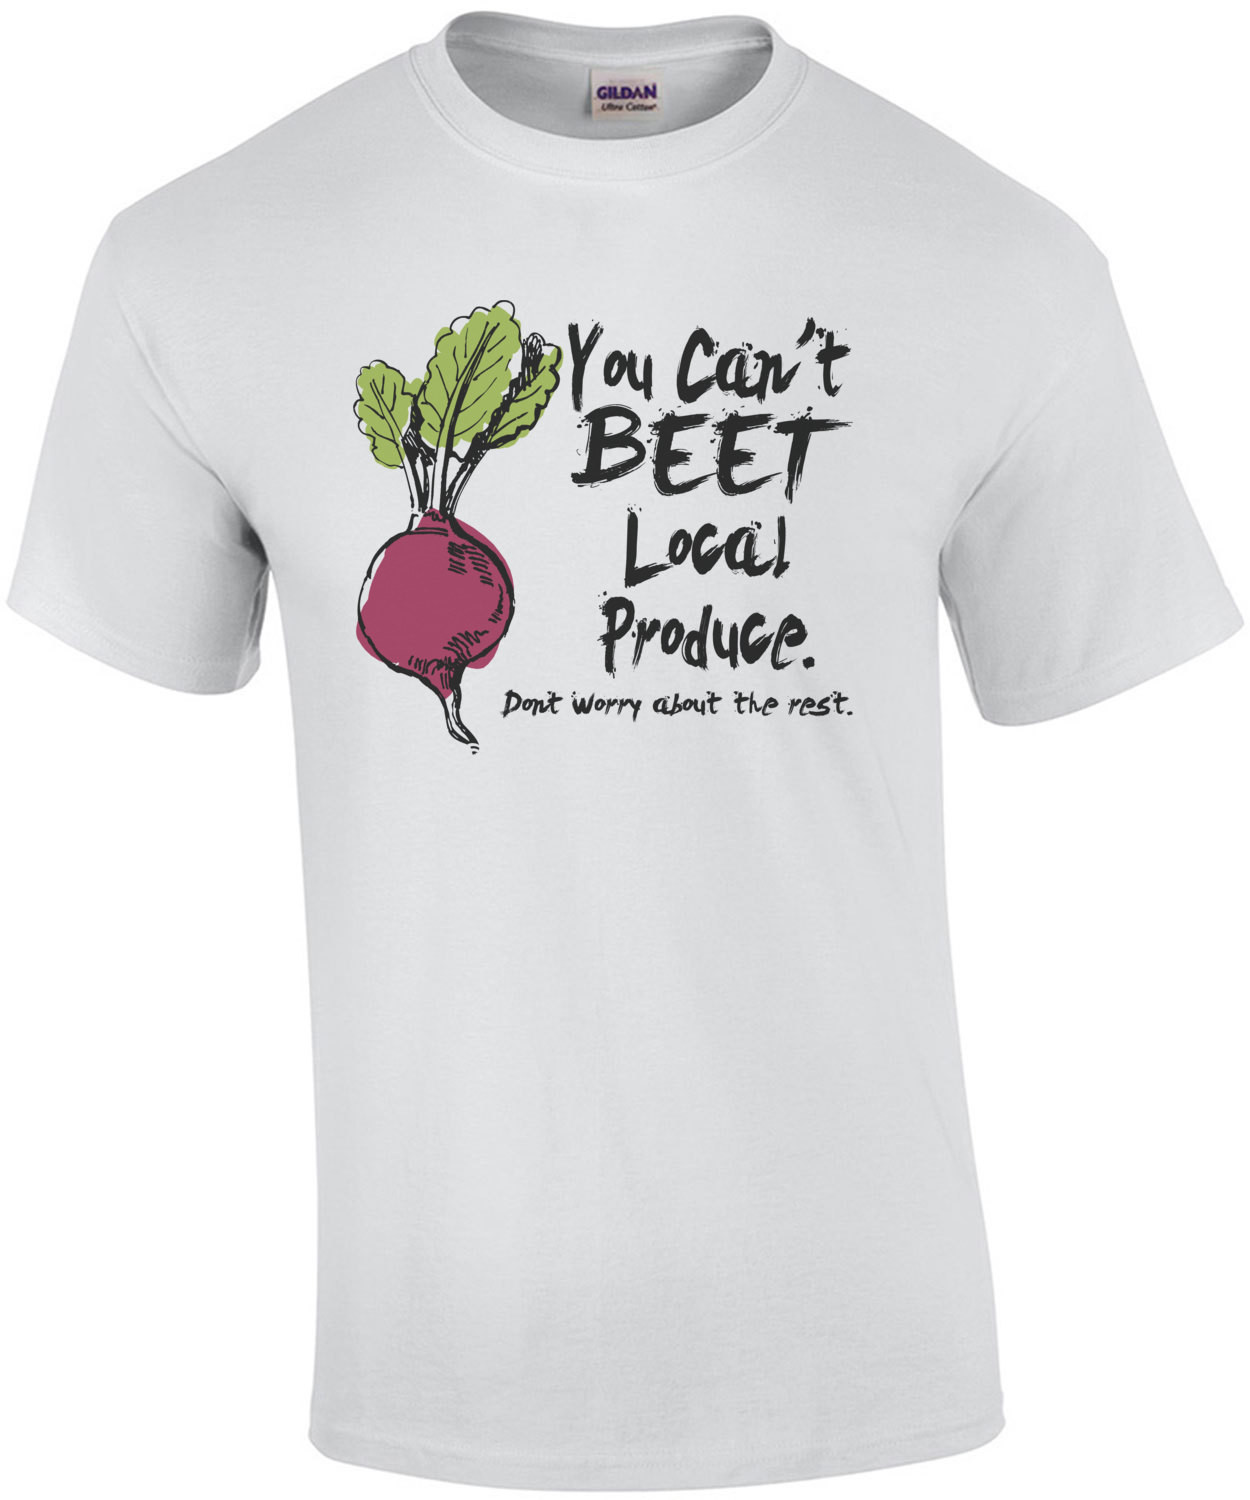 You Cant Beet Local Produce T-Shirt